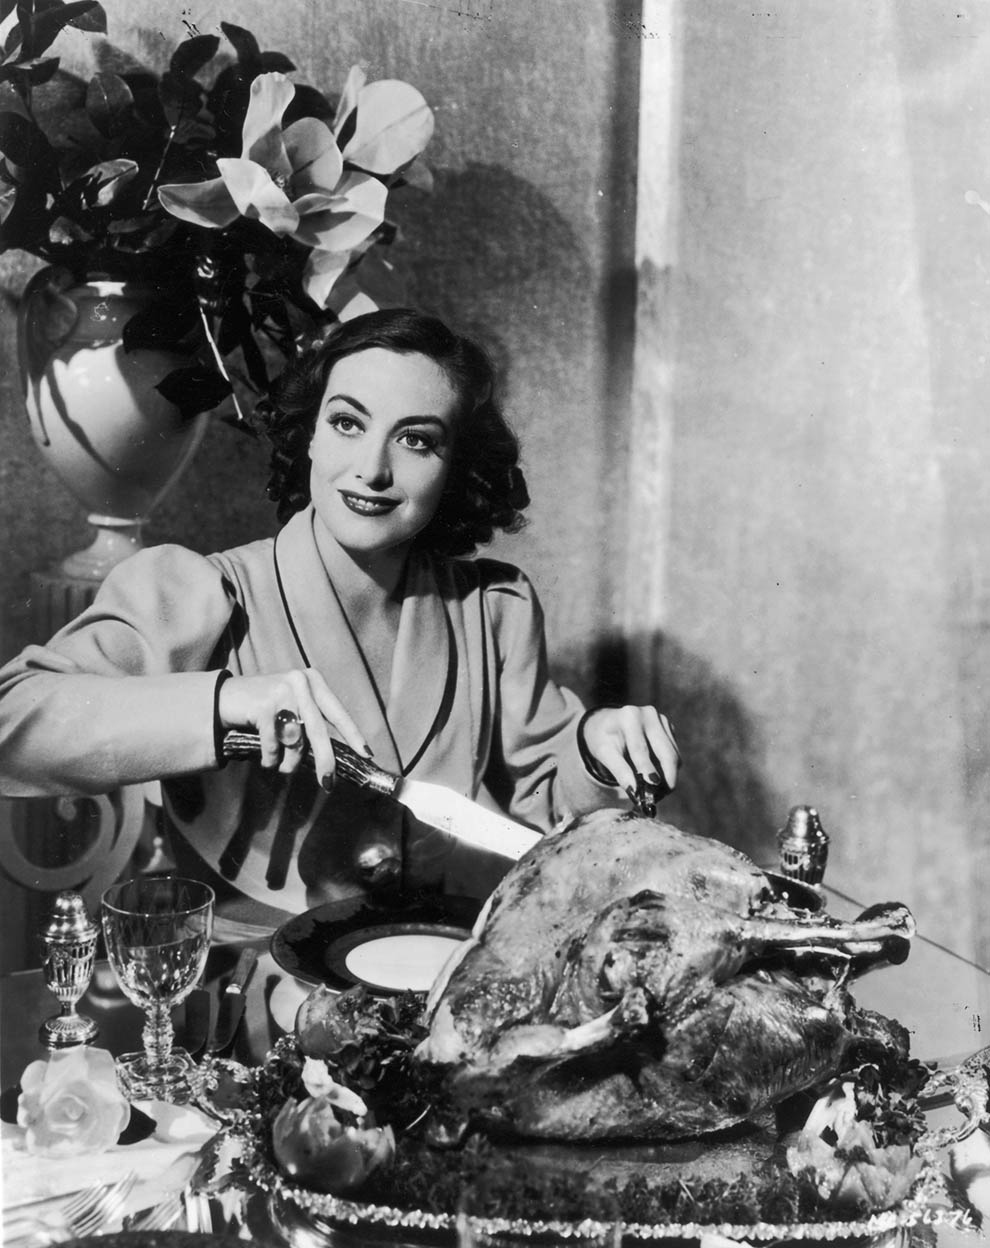 Amazing Historical Photo of Joan Crawford in 1930 